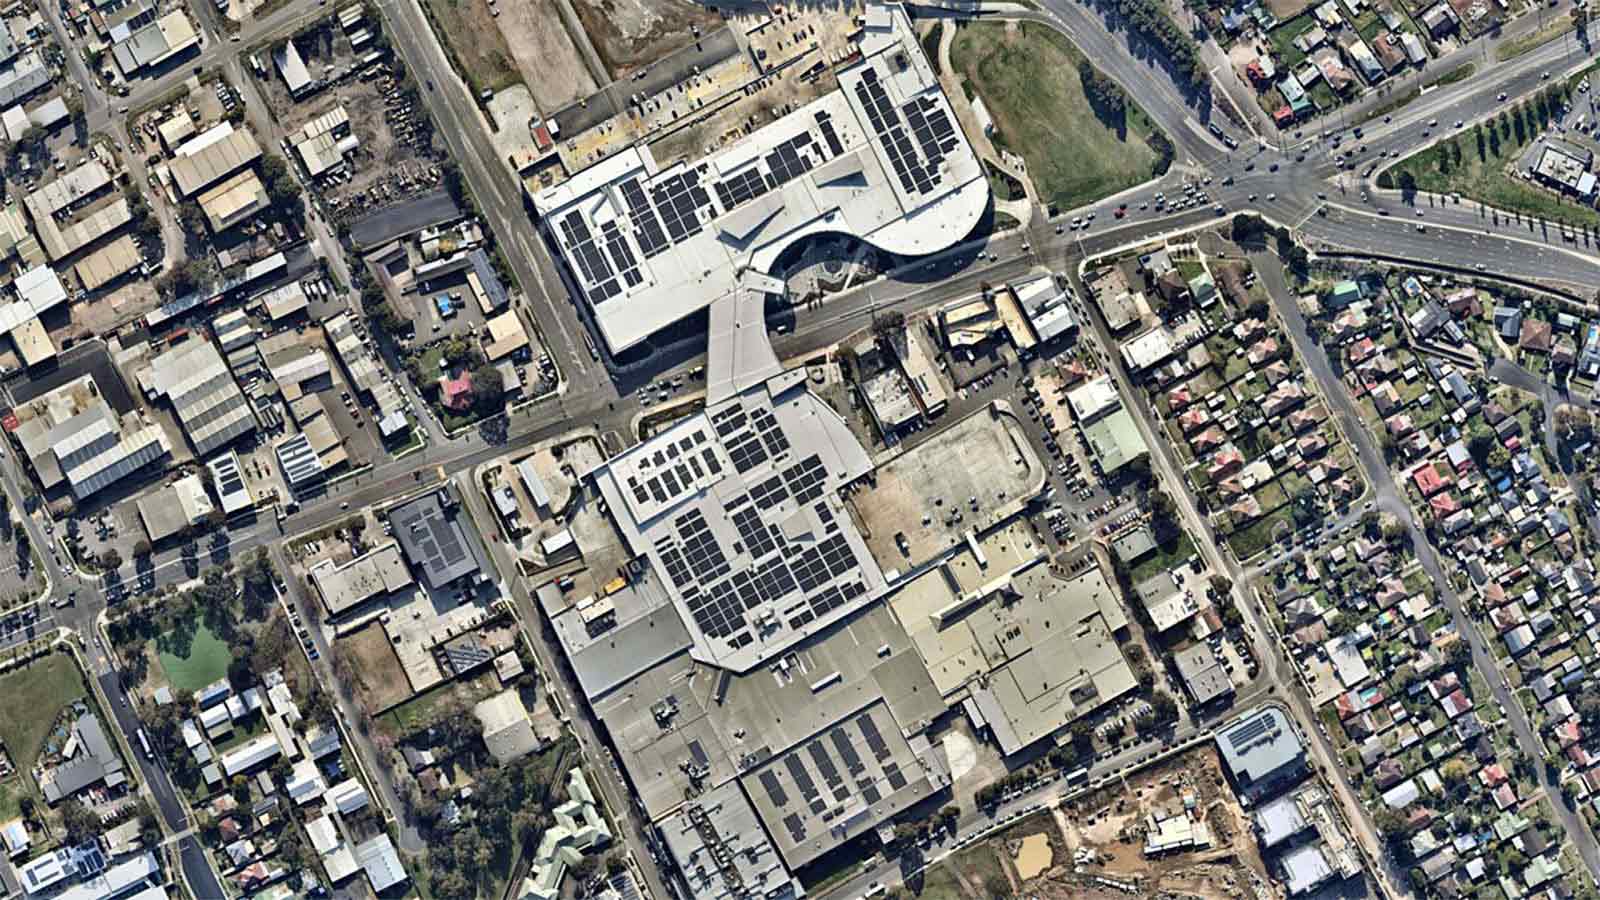 Aerial view of industrial buildings fitted with solar panels next to a roads and residential buildings. 